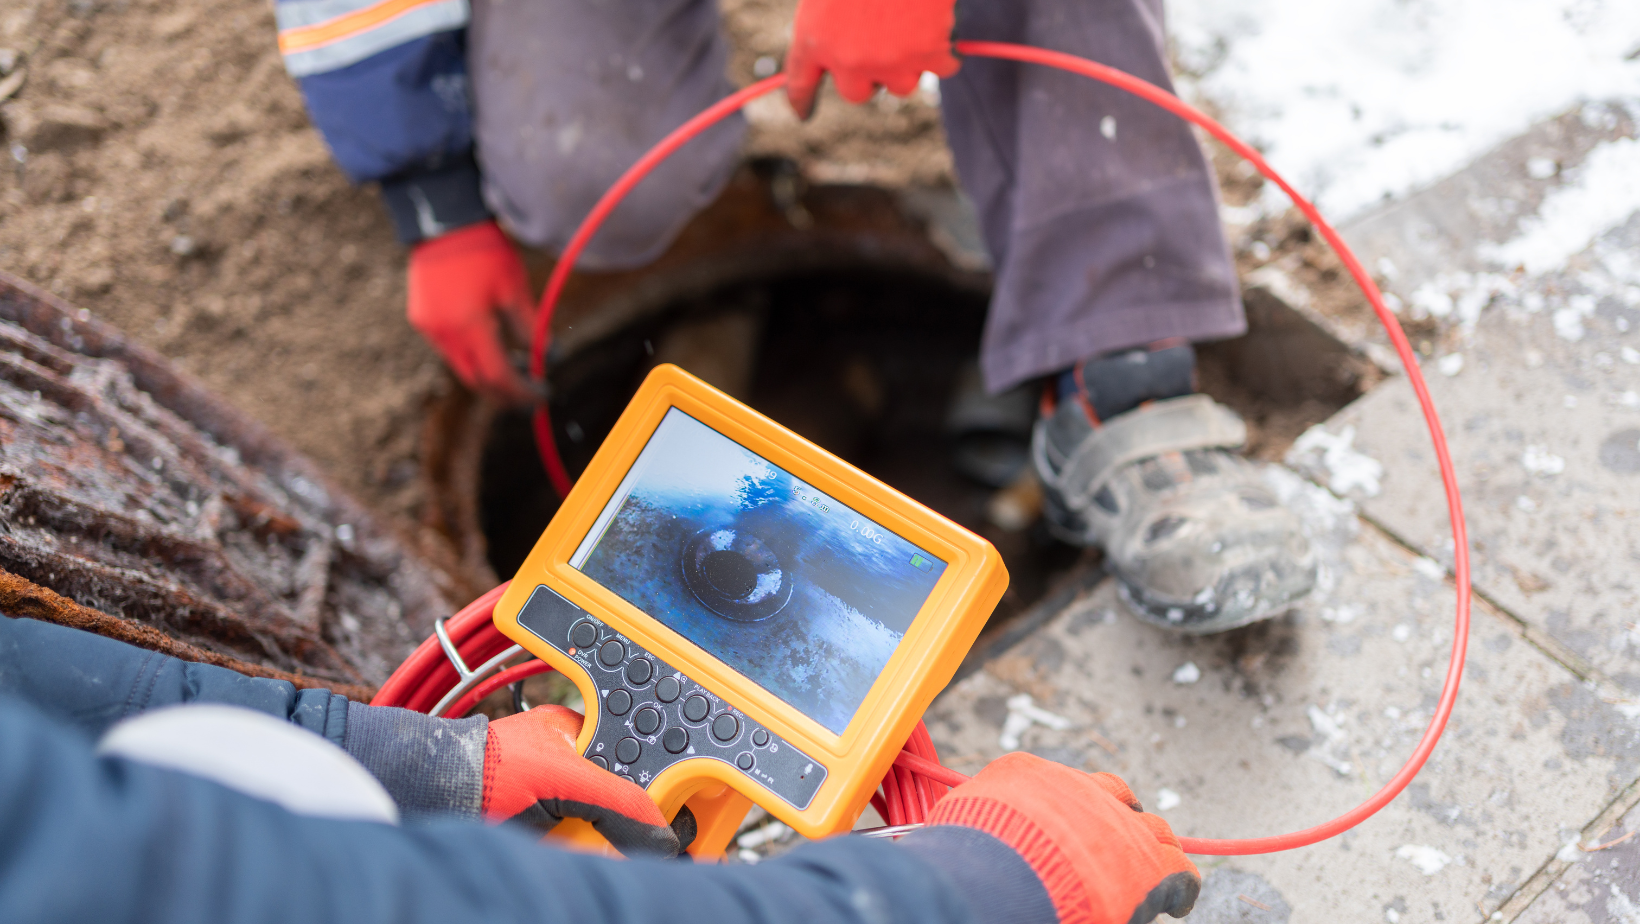 pipe inspection camera